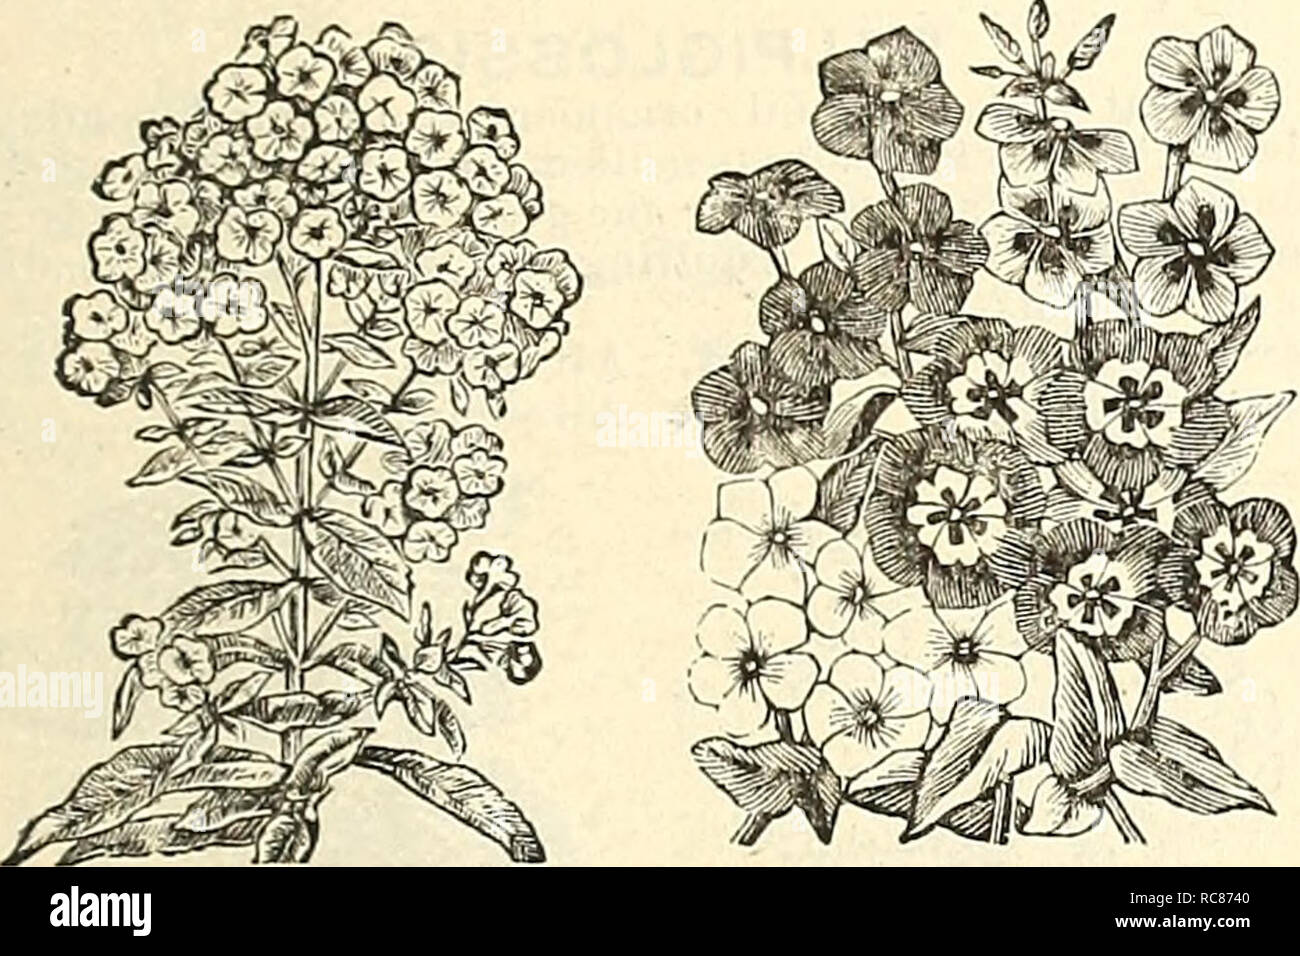 . Dreer's garden calendar : 1886. Seeds Catalogs; Nursery stock Catalogs; Gardening Catalogs; Flowers Seeds Catalogs; Gardening Equipment and supplies Catalogs. FOR THE FLOWER CARD EX. 57 PHLOX—(Continued. 6328 P. Peach Blossom. Larije flowers of a delicate salmon tint 10 6326— Iladowitzi. Rose, striped white 10 6330 — Mixed. All colors. Per oz., iJl.OO 5 PHLOX DRUMMONDI GRANDlFLORA. An improvement on the old varieties in stronger, more comjiact growth, and larger flowers, with white cen- tres, admirably relieved bv a (hirk violet eye; li feet. 6331 P. Alba'Pura. Pure white 10 633-1— Carminea  Stock Photo